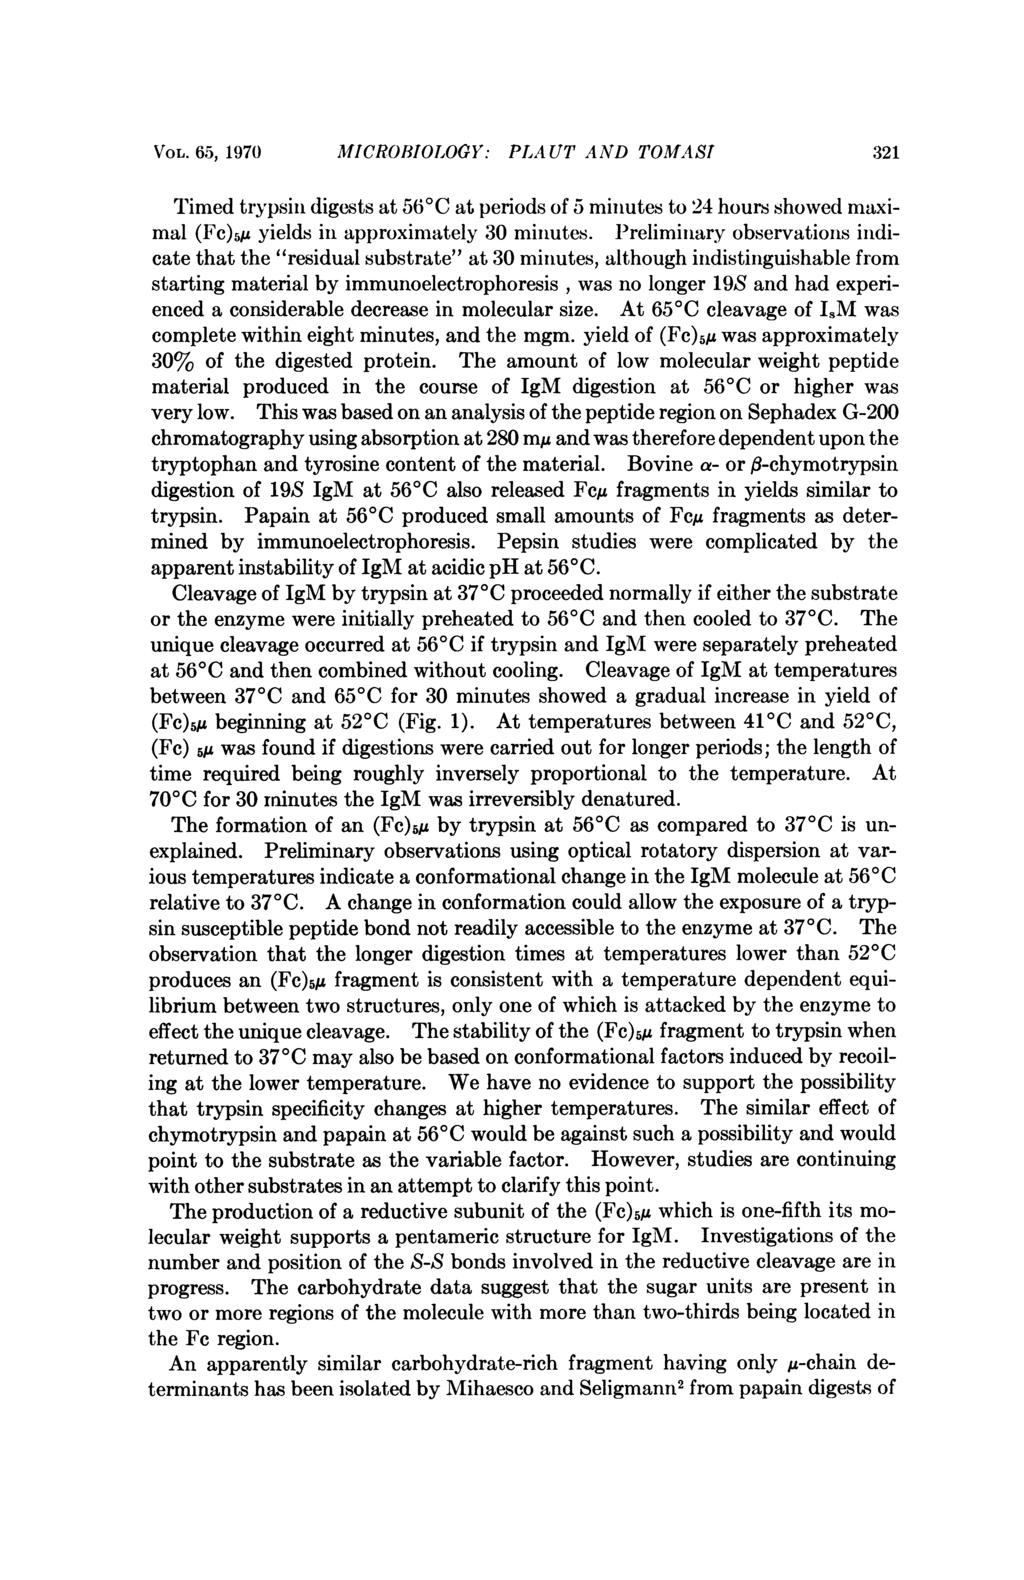 VOL. 65, 1970 MICROBIOLOGY: PLAUT AND TOMAS[ 321 Timed trypsin digests at 56CC at periods of 5 minutes to 24 hours showed maximal (Fc)5M yields in approximately 30 minutes.